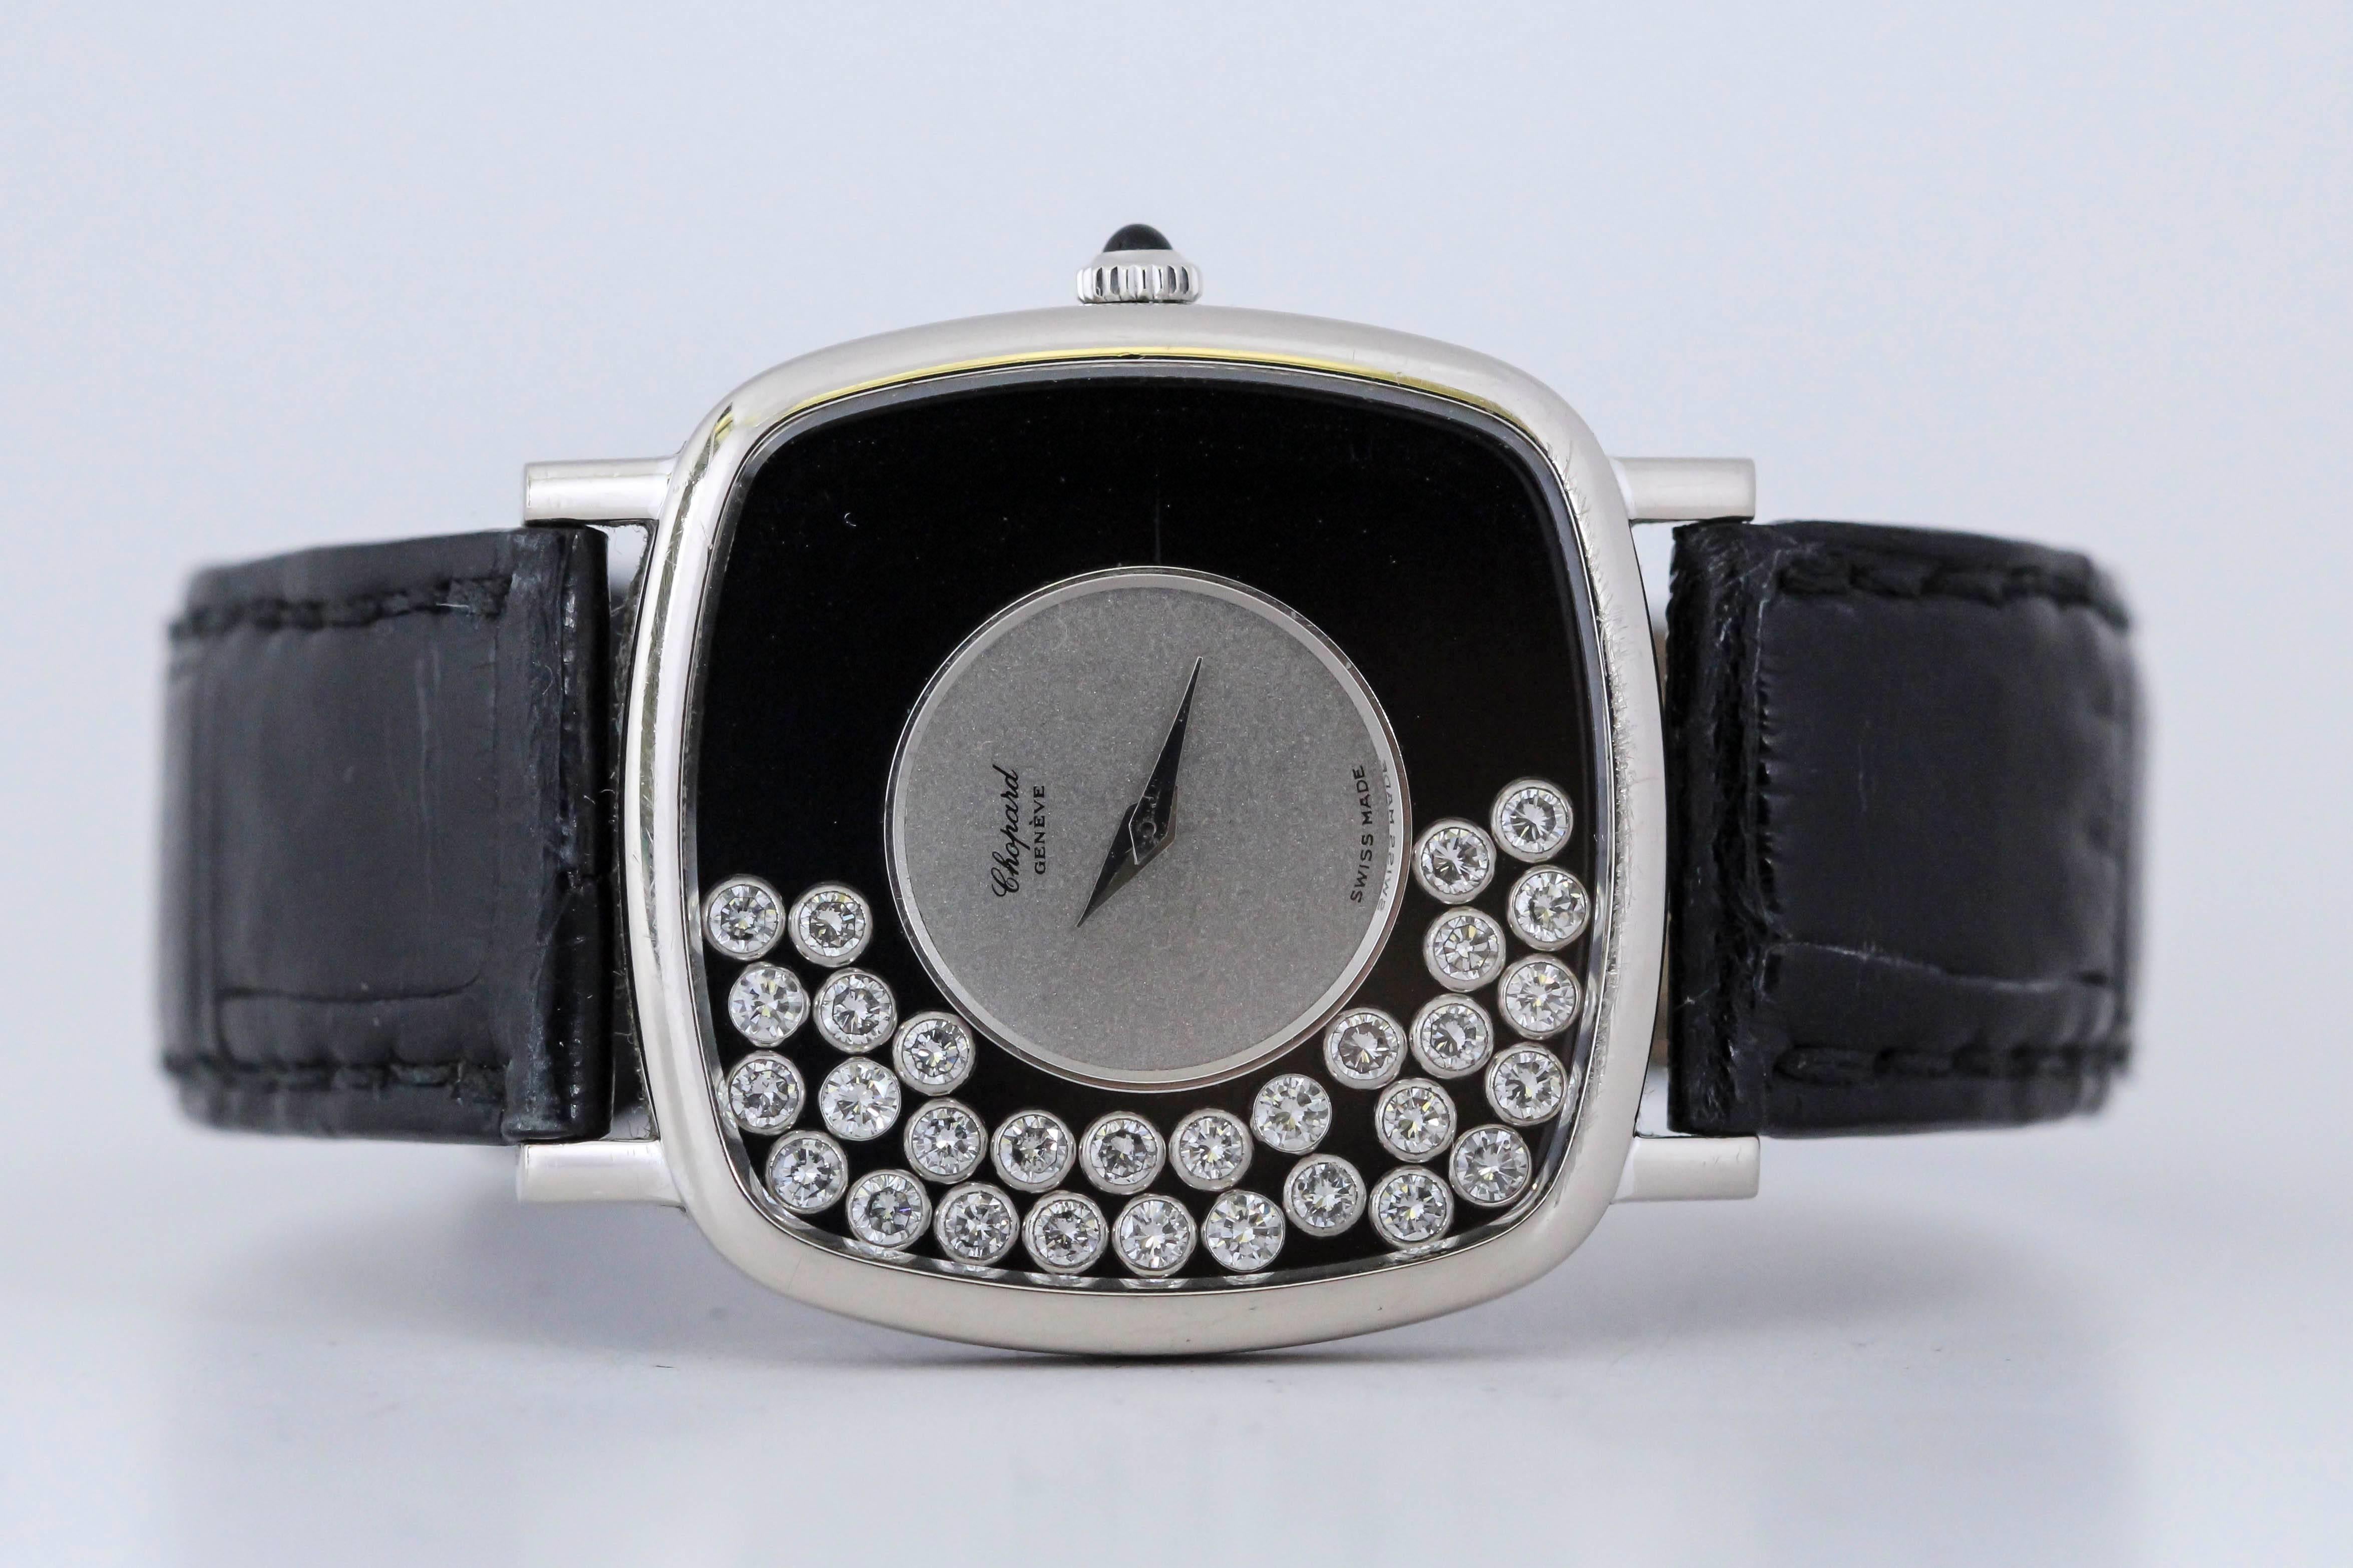 Chopard  Happy Diamonds reference 2106  with a cushion shaped 18k white gold case, black/silver dial with bezel set diamonds floating around, run by a manual wind movement and is on a modern Chopard leather strap and buckle. 